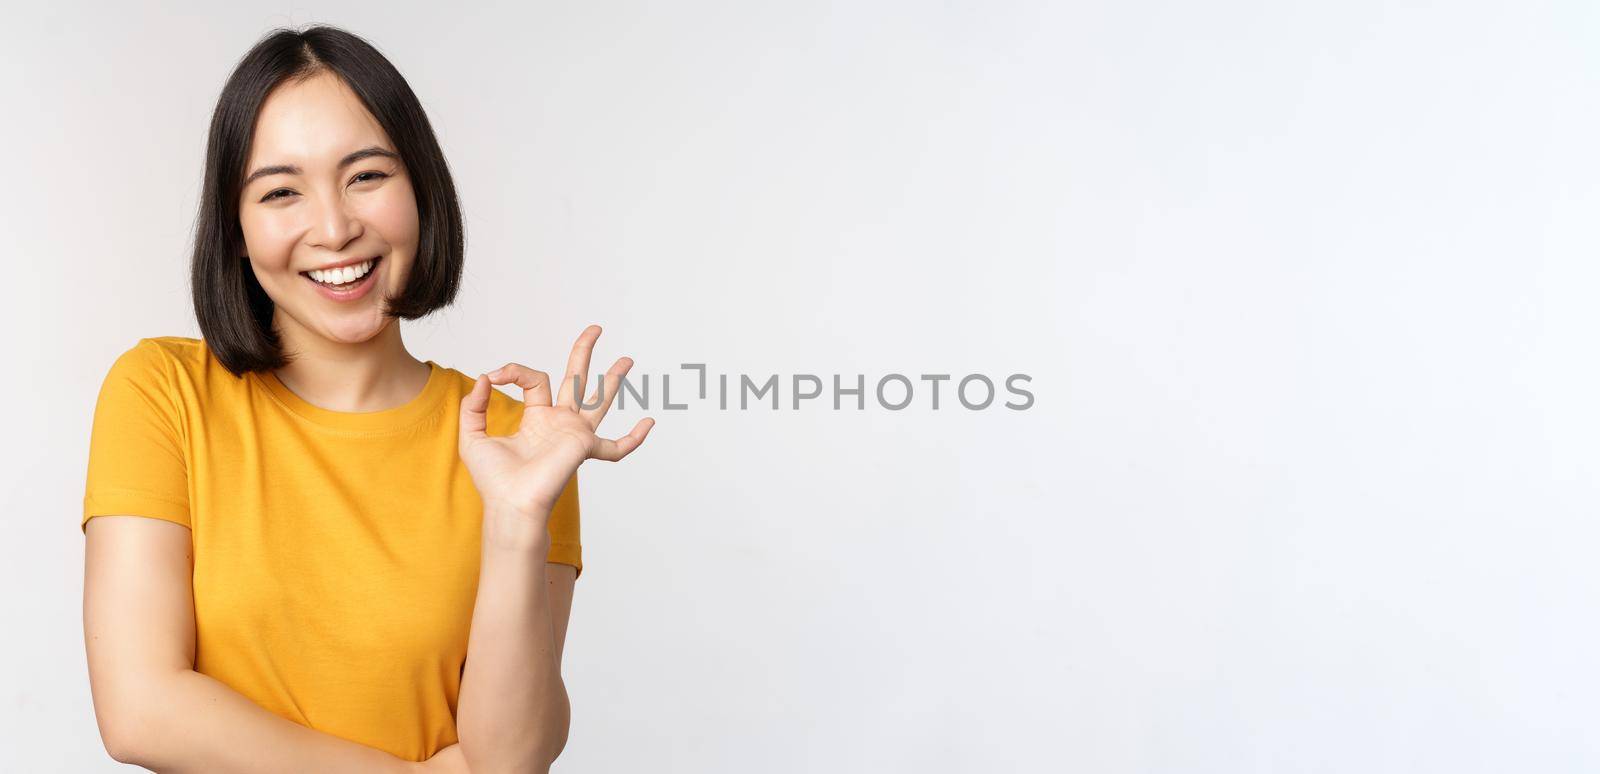 Beautiful young woman showing okay sign, smiling pleased, recommending smth, approve, like product, standing in yellow tshirt over white background.